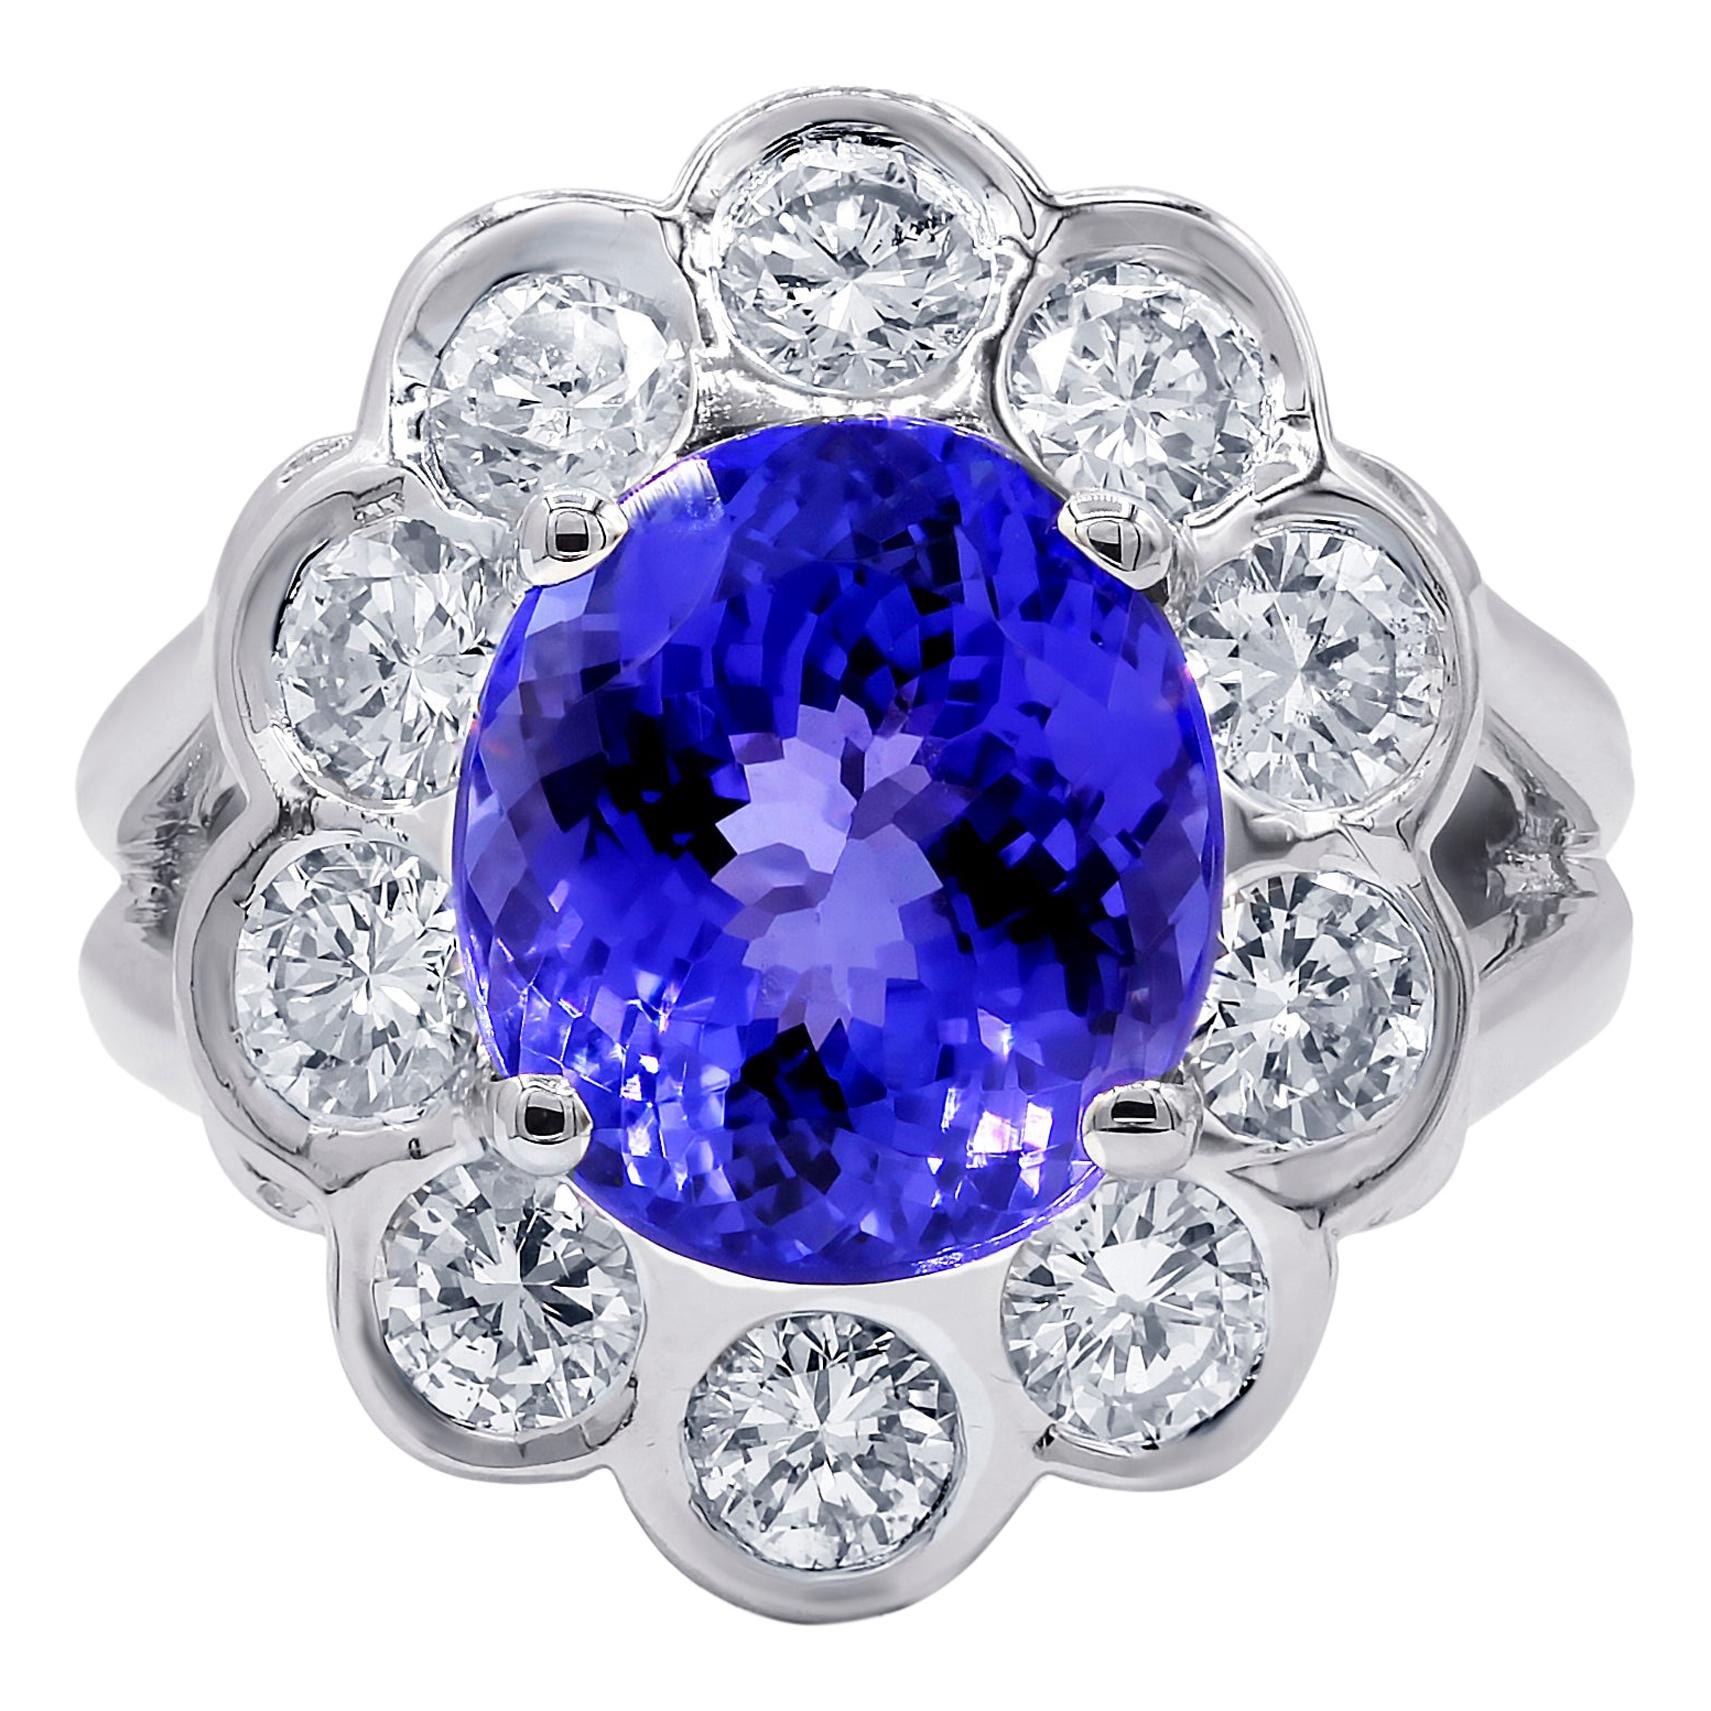 18k White Gold Diamond Fashion Flower Ring with 6.58 Cts Tanzanite For Sale